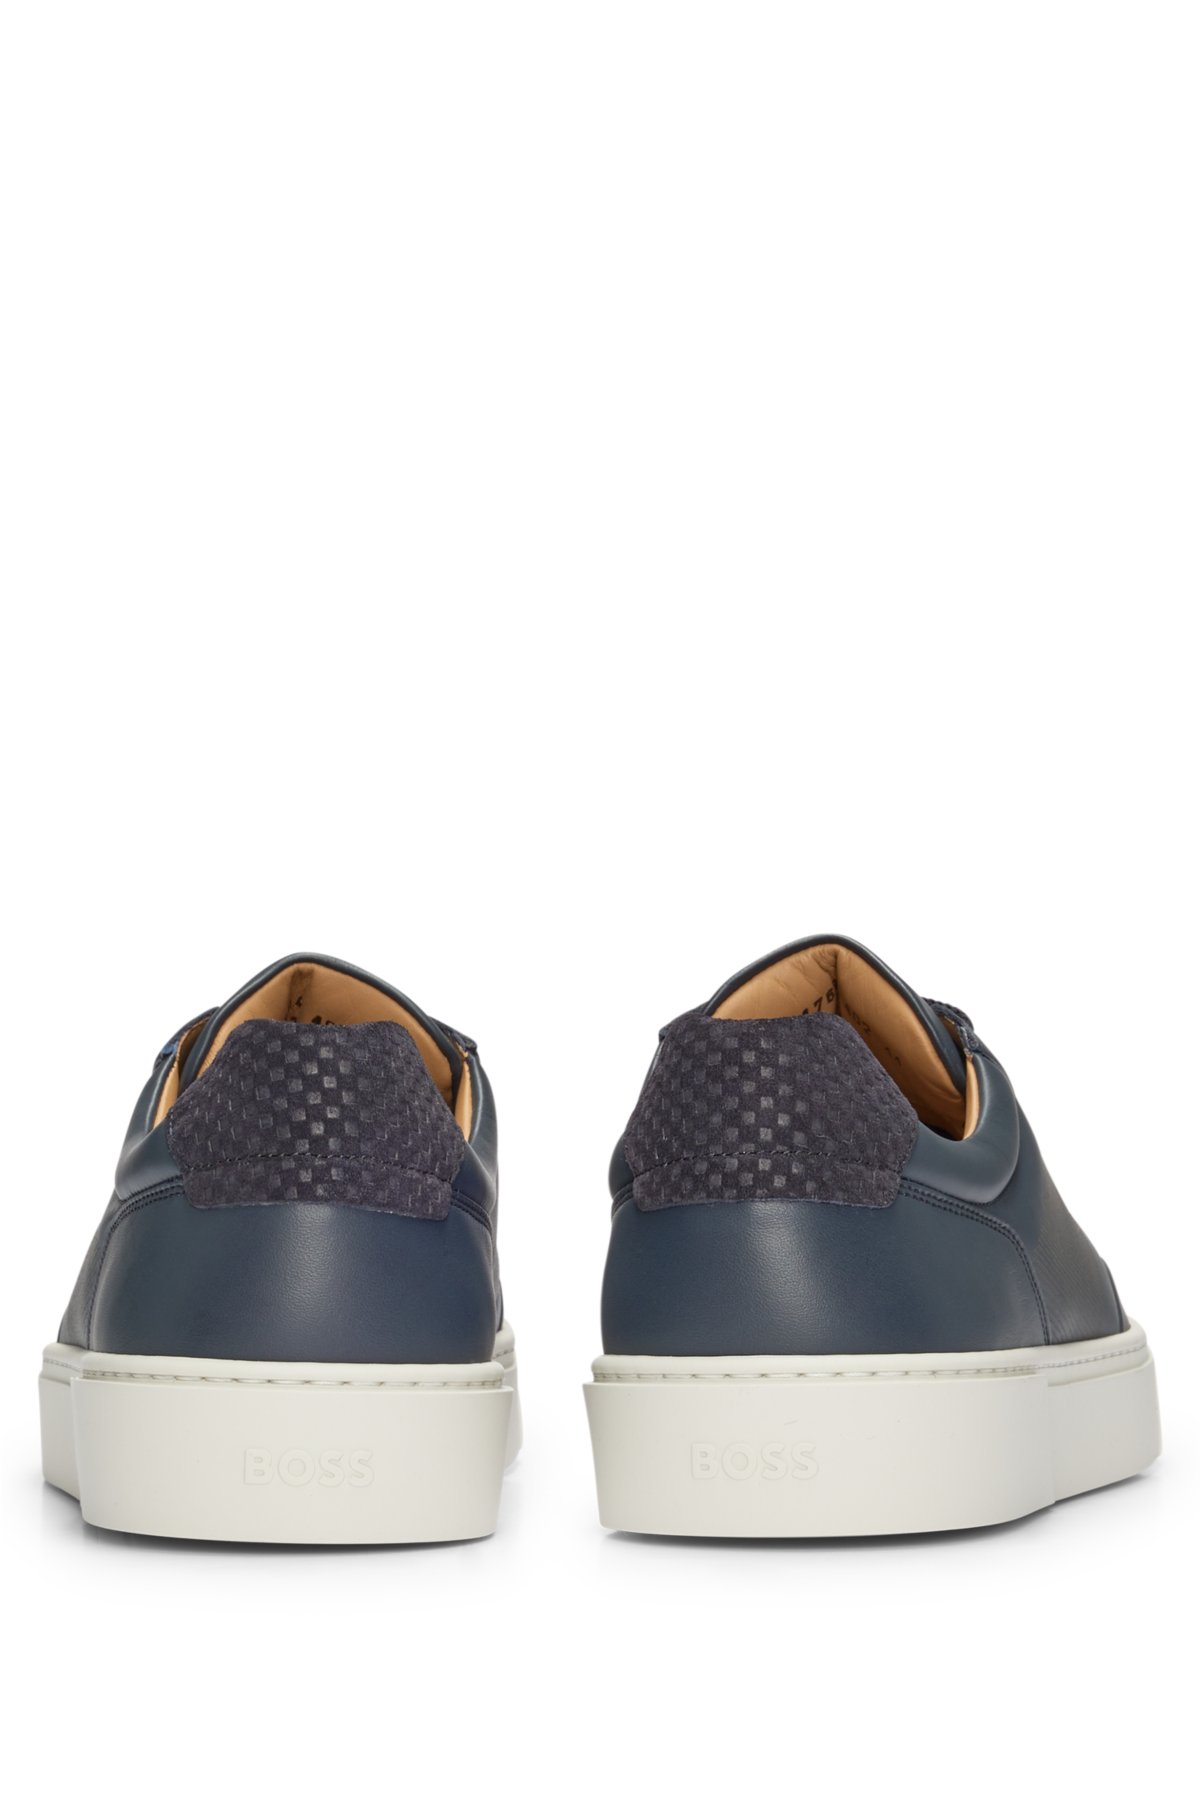 Porsche x BOSS leather trainers with special branding, Dark Blue